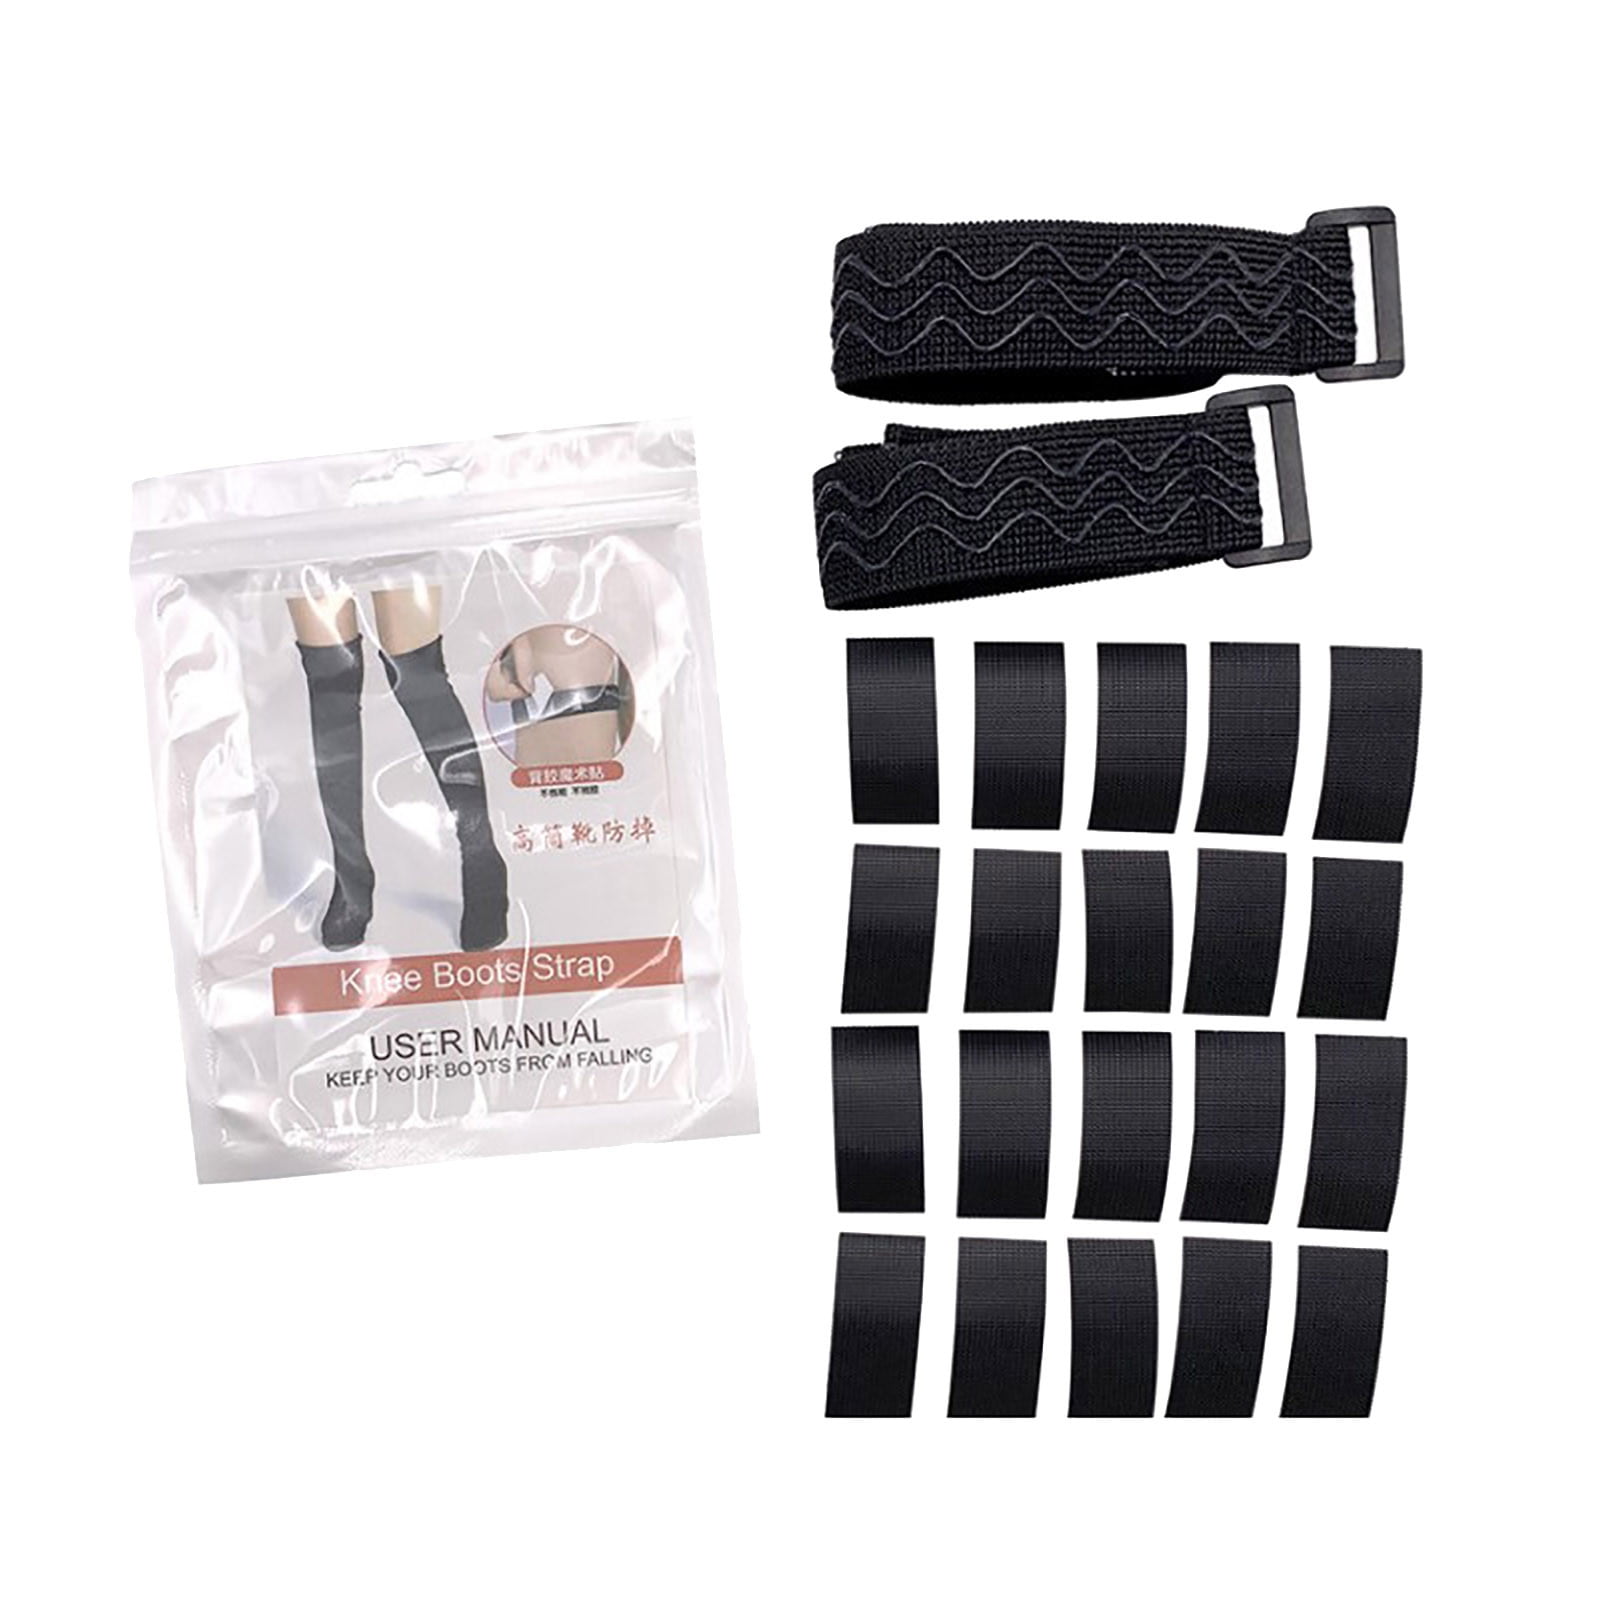  Wisdompro Boot Straps, 1 Pair Knee Boot Straps of Elastic  Adjustable Belt, plus Extra 12 Pcs Adhesive Tape Hook Sticker for fall-off  prevention : Sports & Outdoors